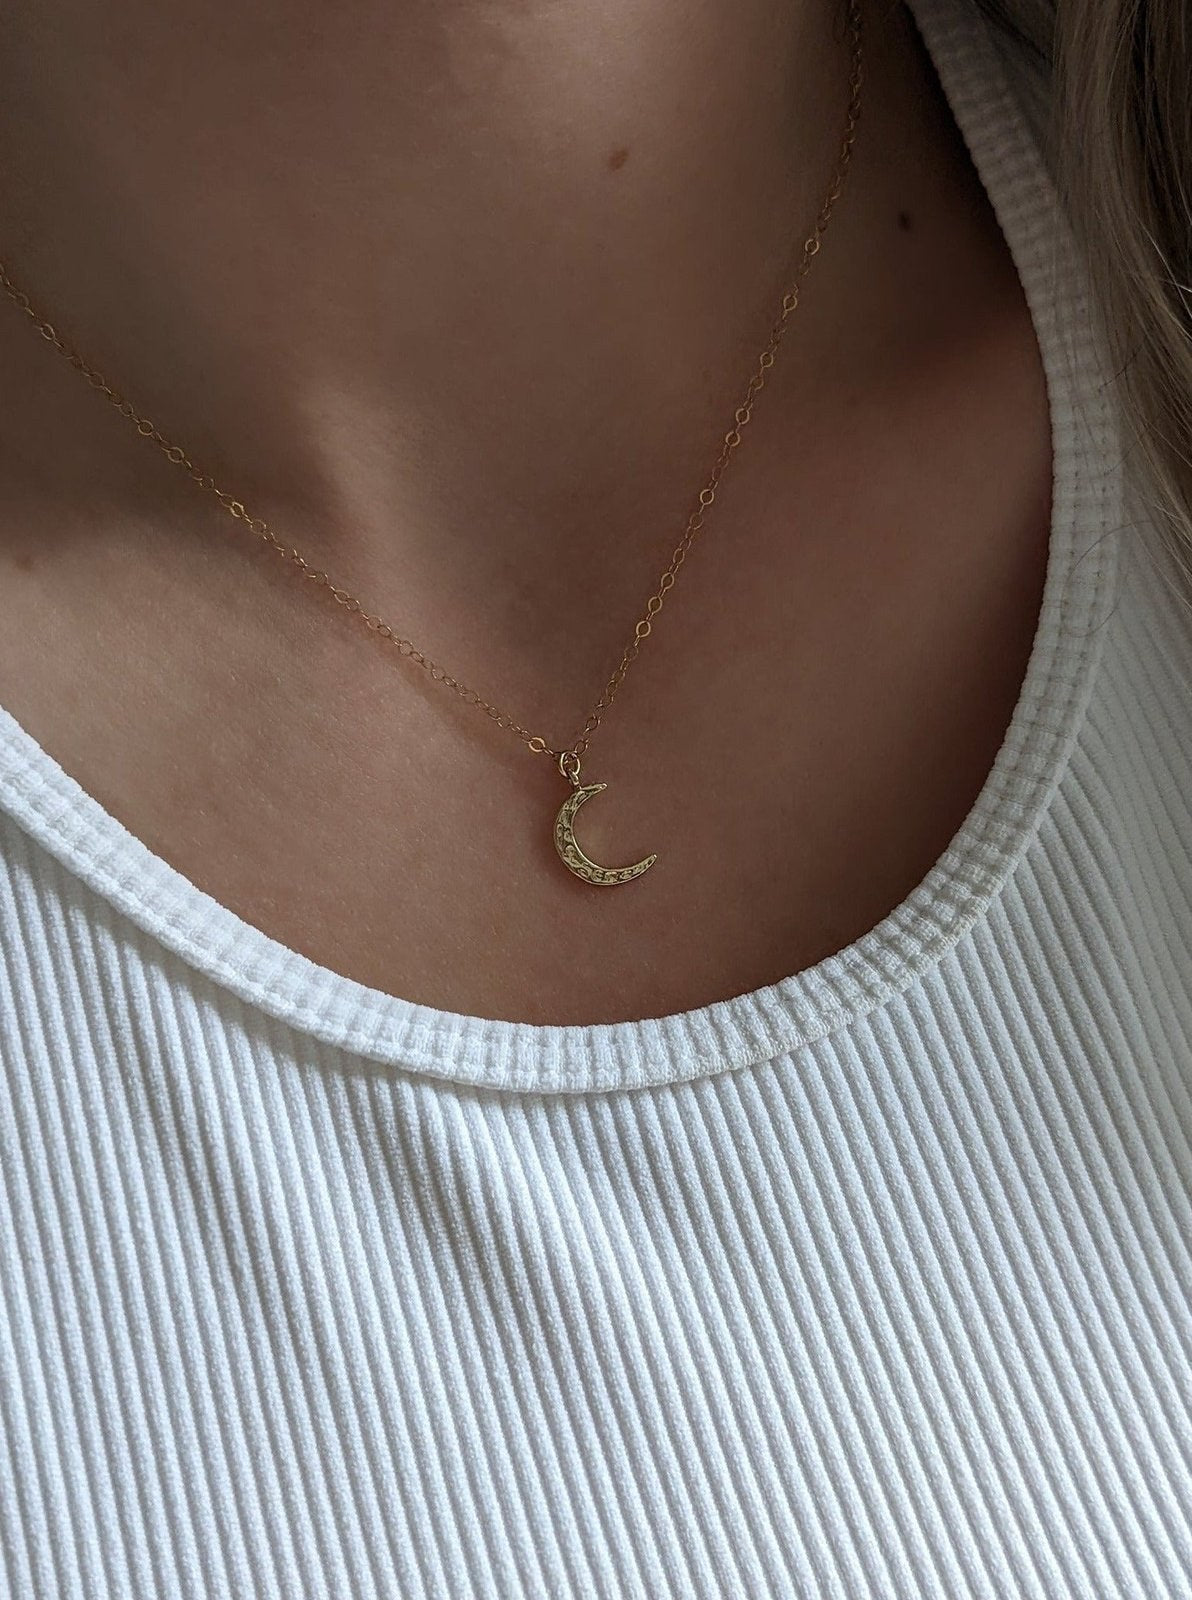 Hammered Crescent Moon Necklace Layer the Love